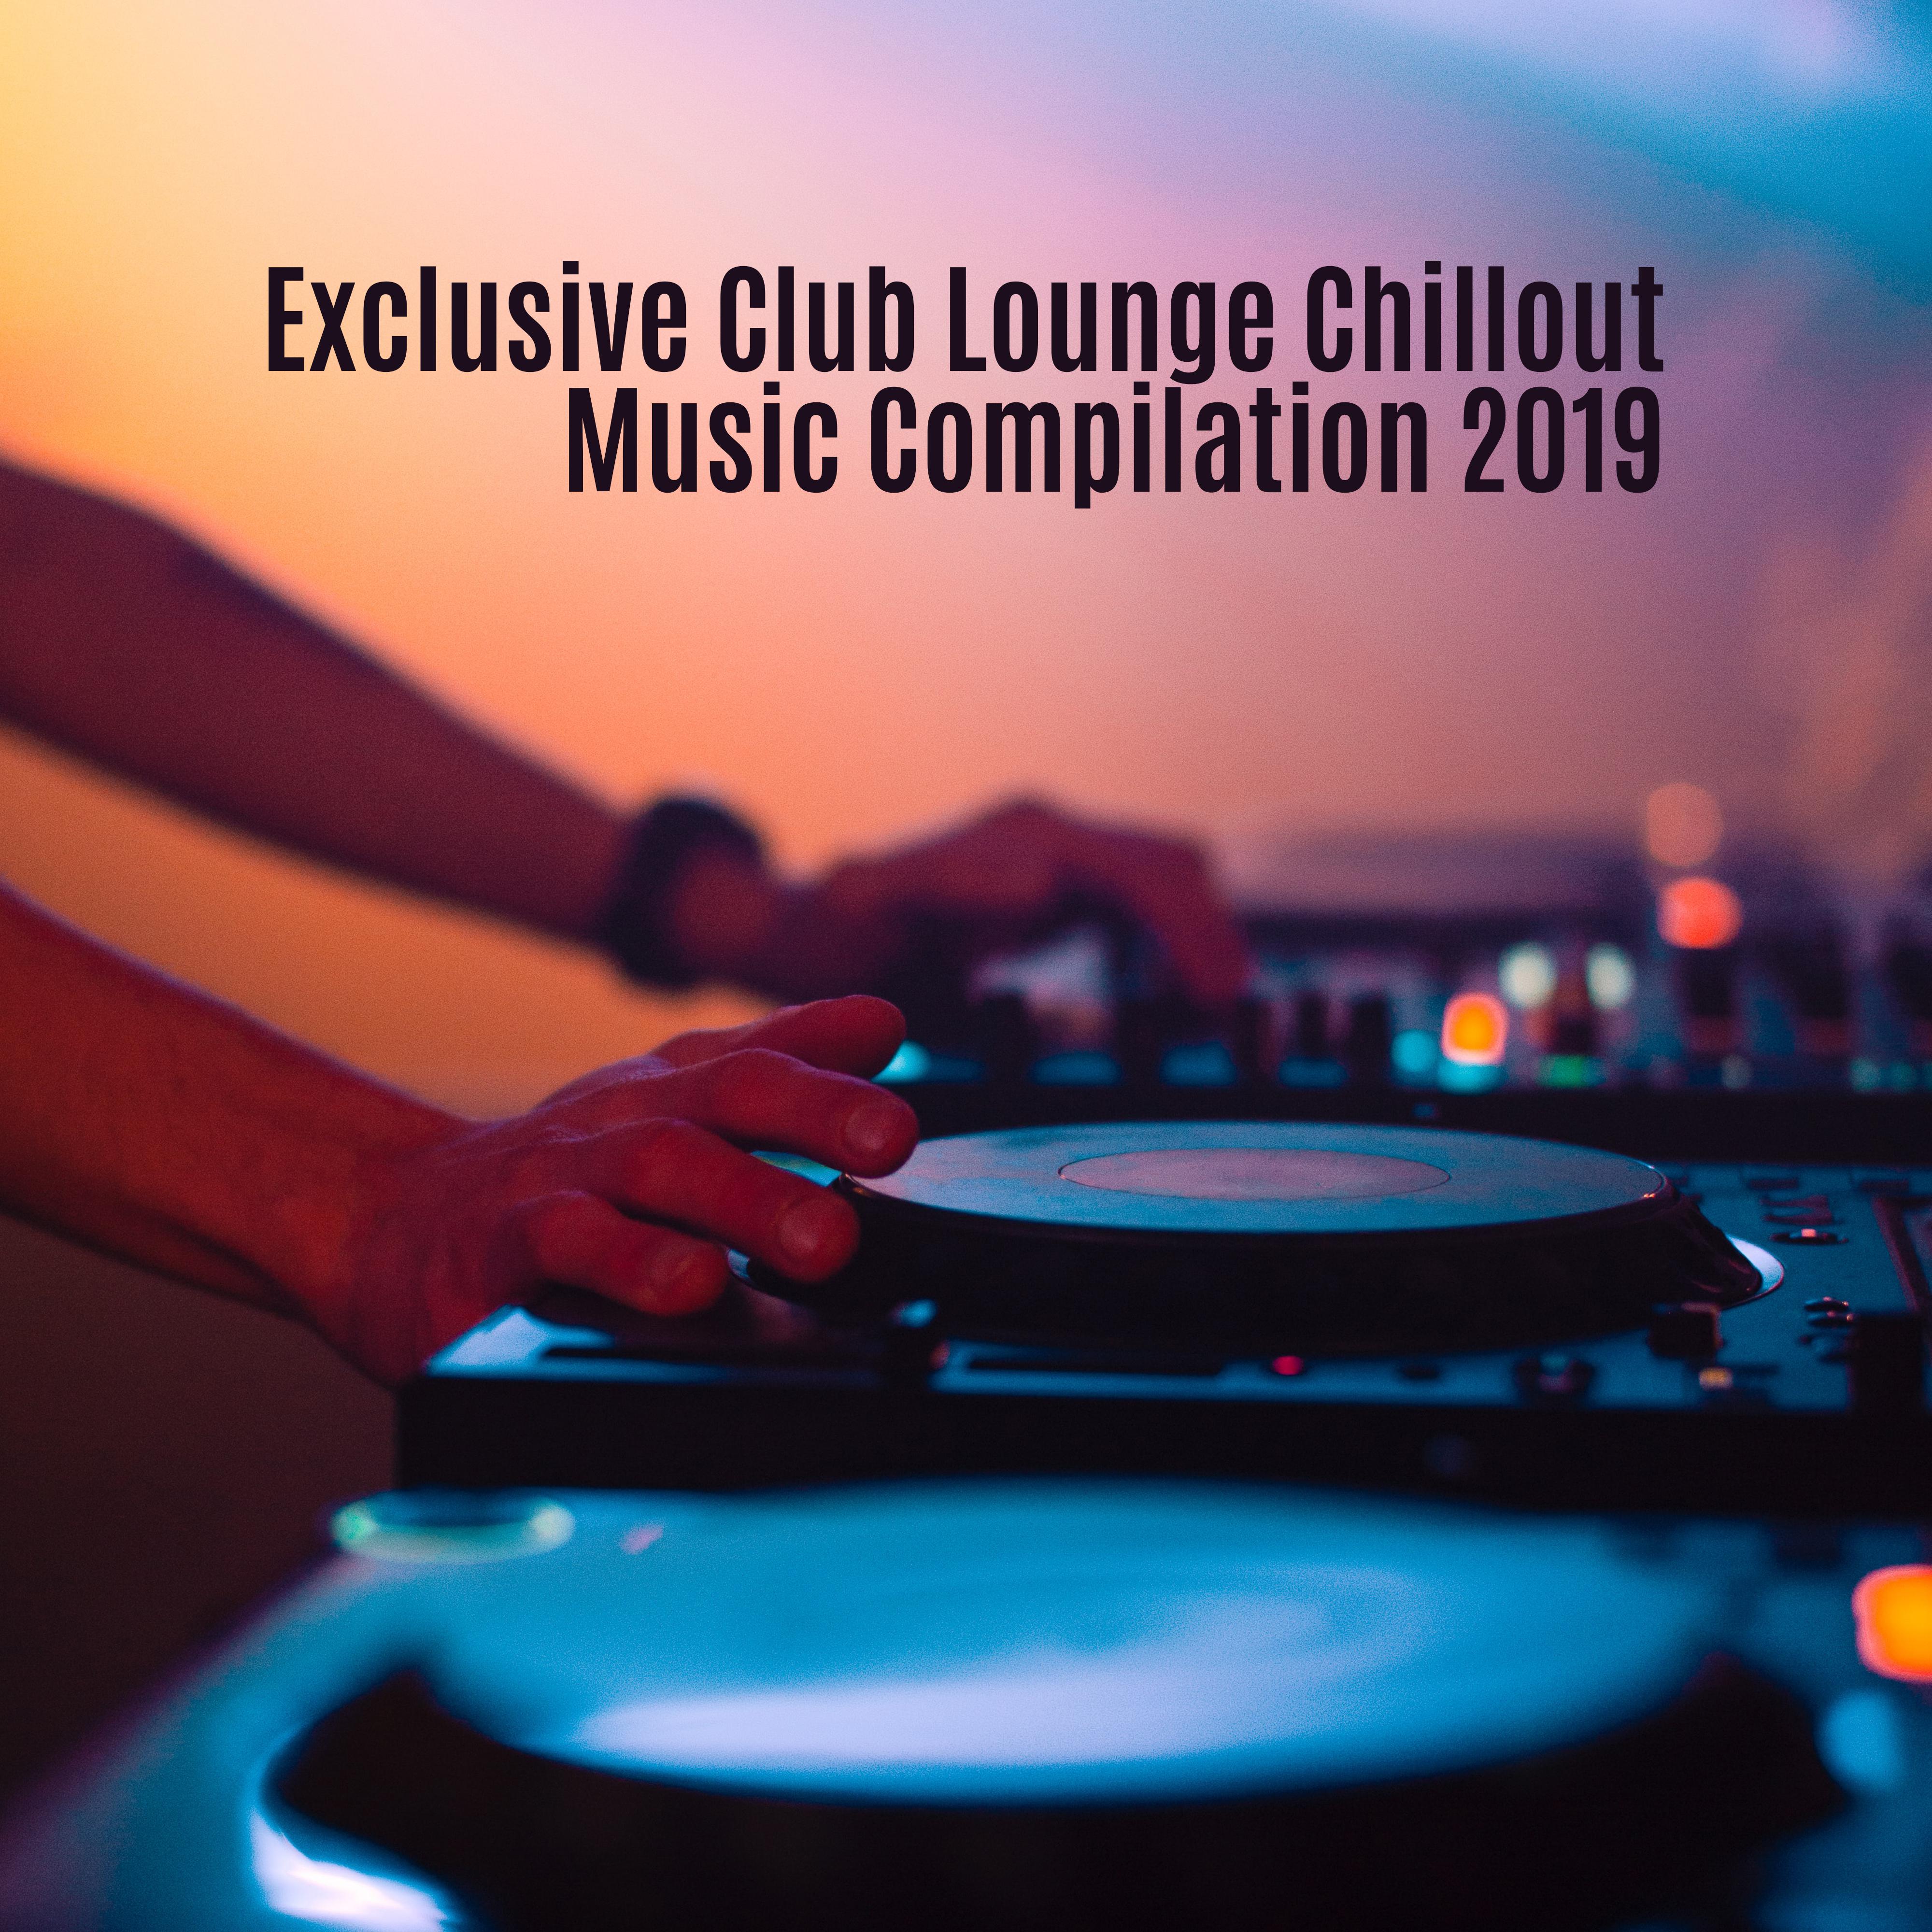 Exclusive Club Lounge Chillout Music Compilation 2019